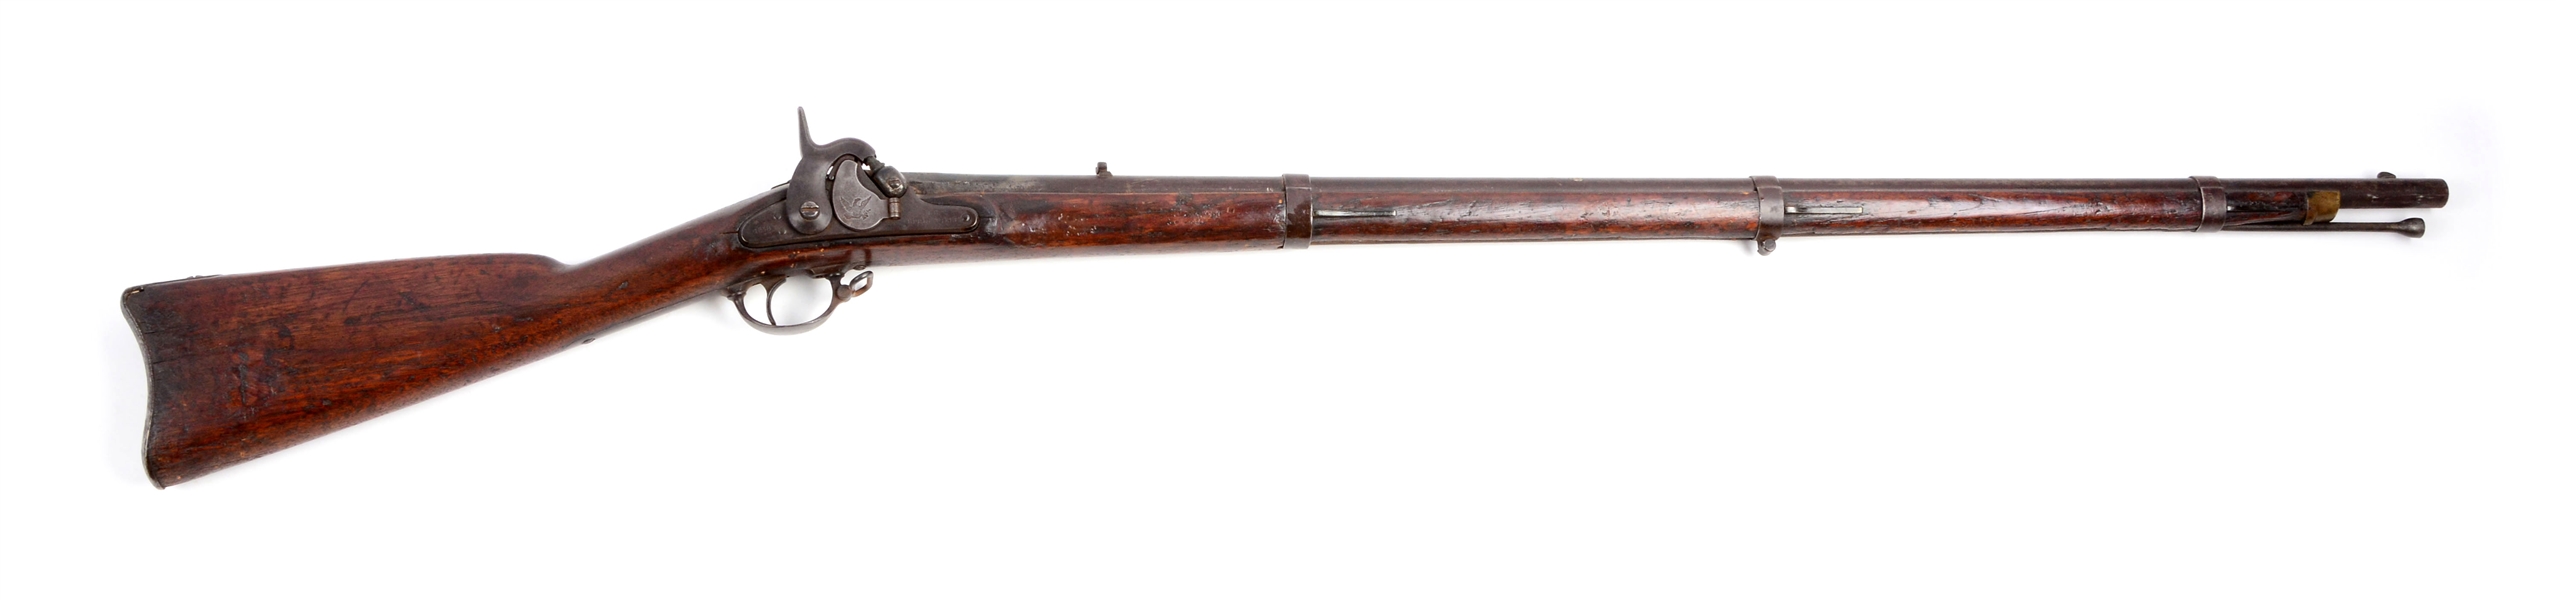 (A) U.S. MODEL 1855 PERCUSSION MUSKET BY SPRINGFIELD.